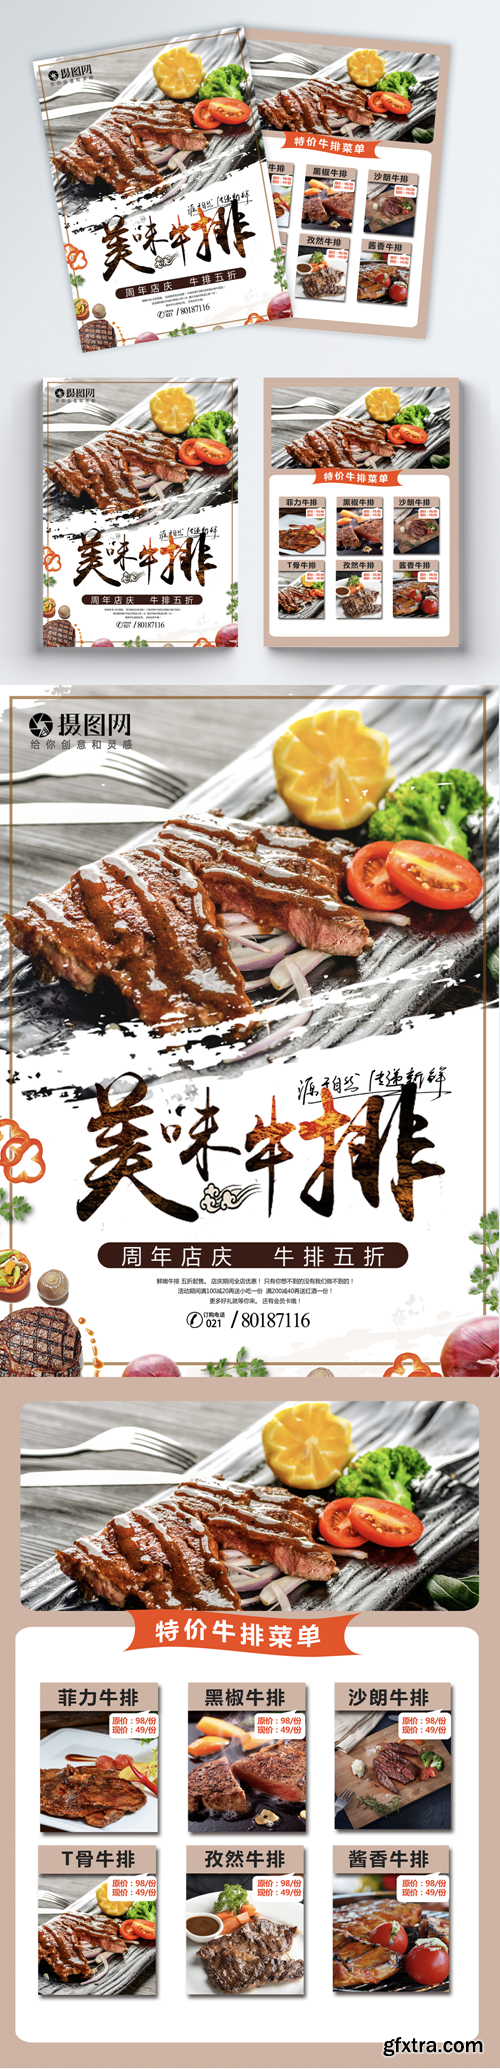 beef sales promotion flyer